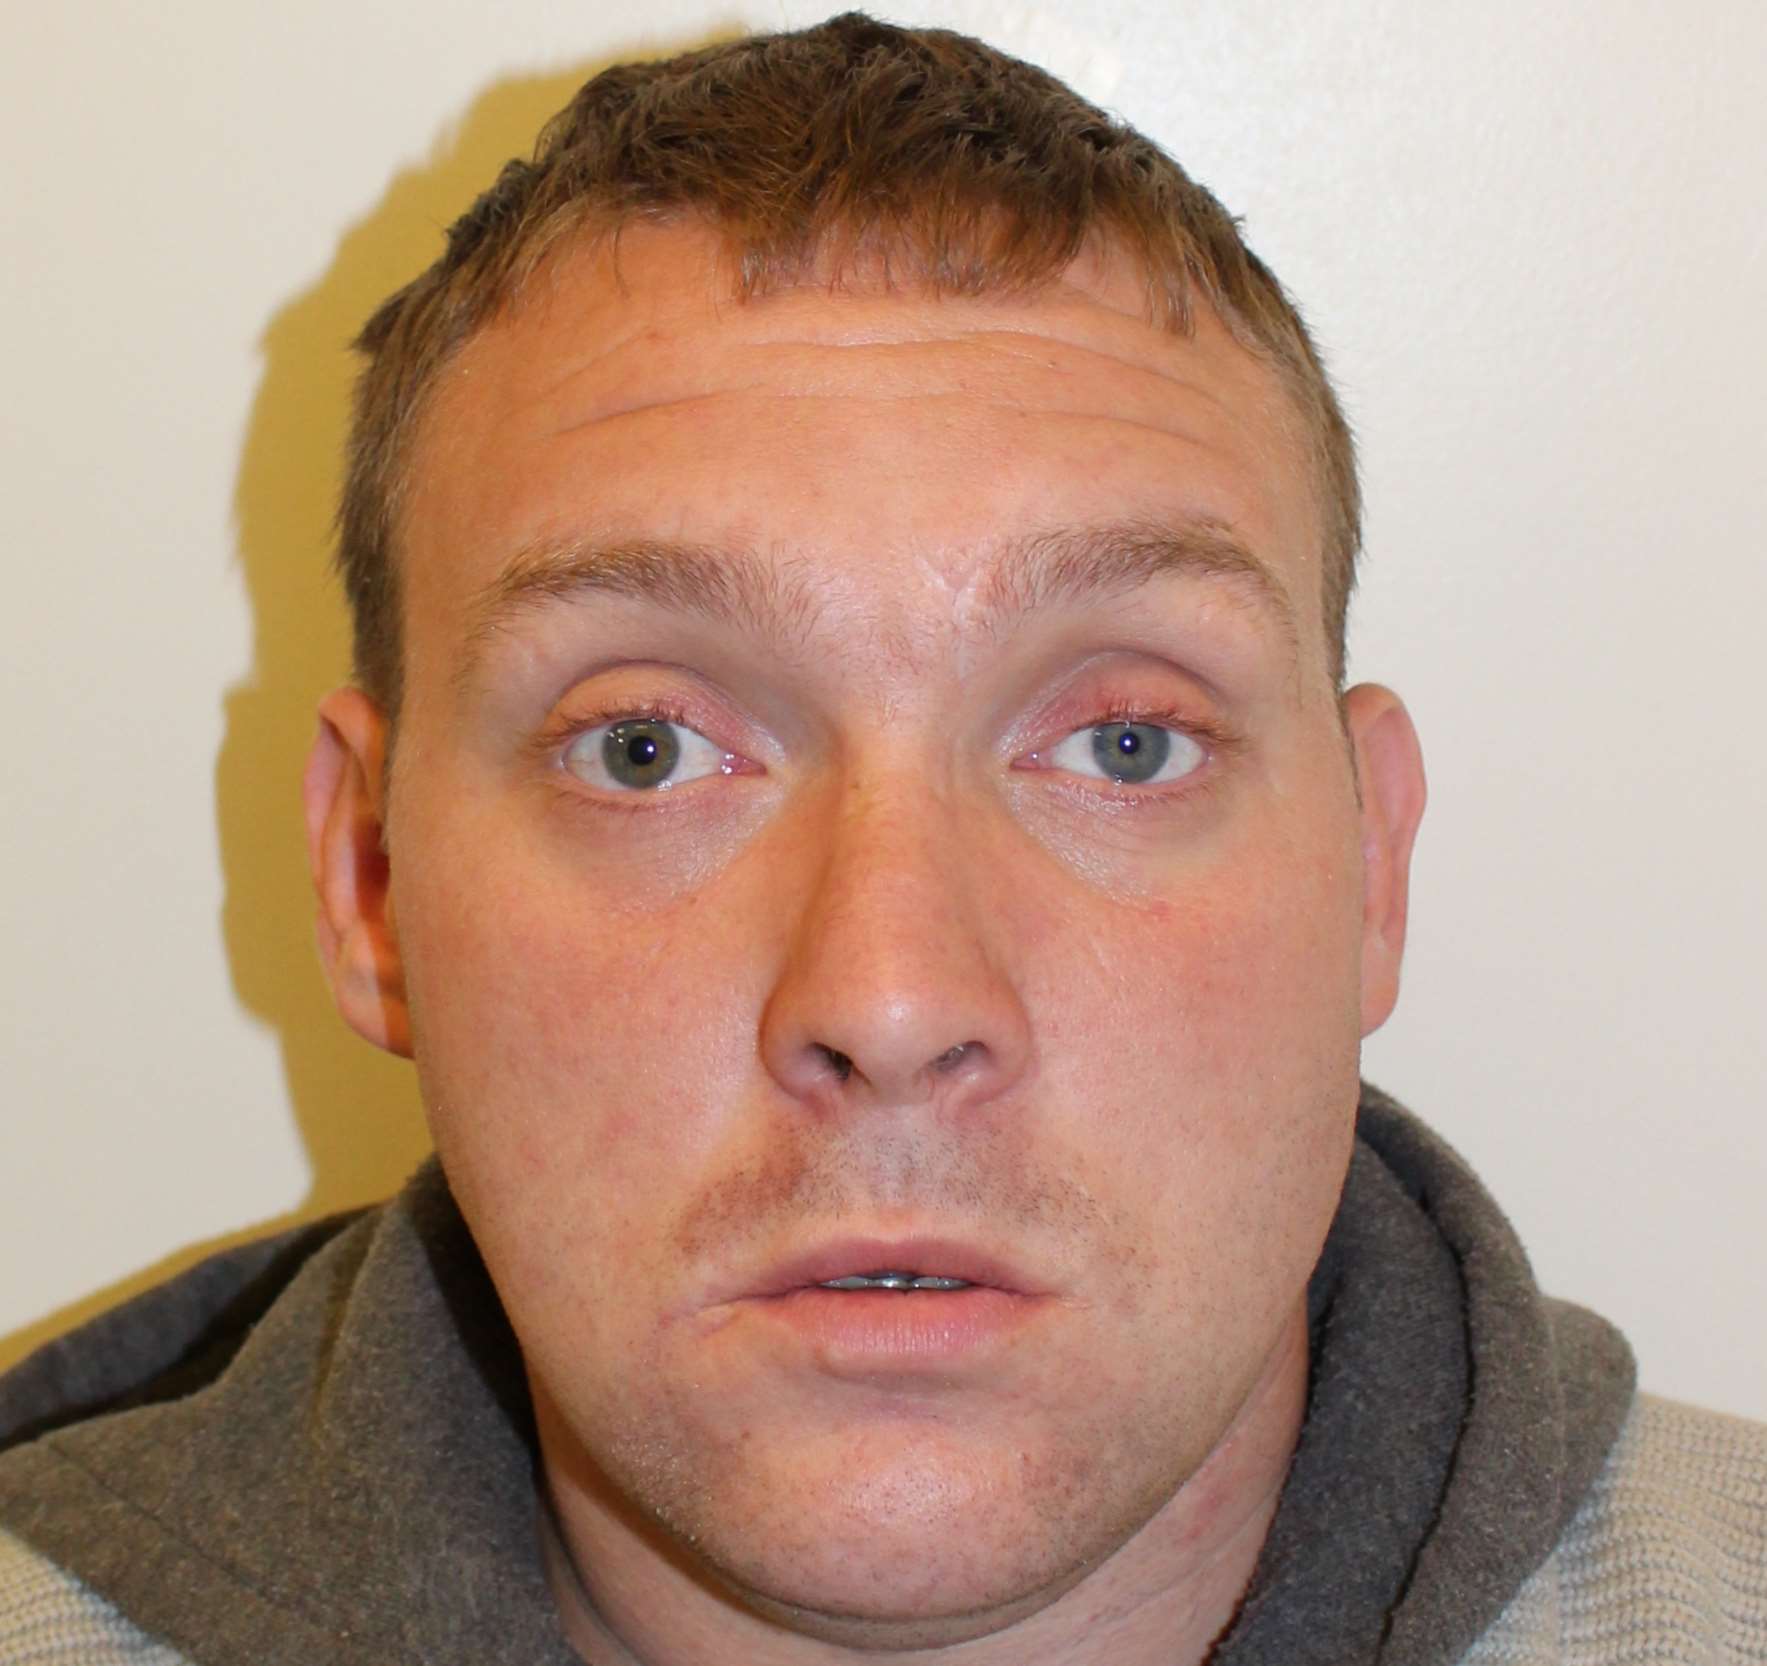 Michael Lane has been jailed for six years for arson with intent to endanger life